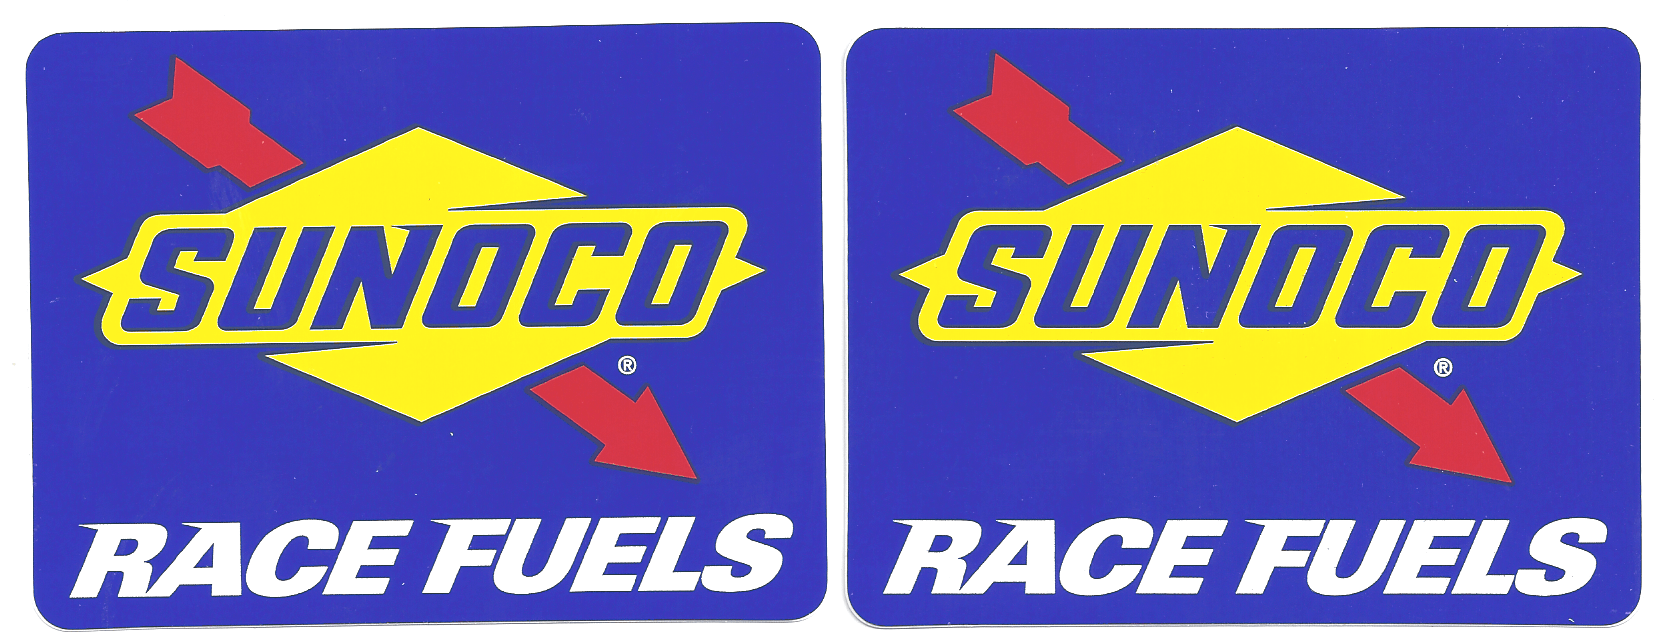 Sunoco Logo - Sunoco Racing Decals Stickers 6 Inches Paired | CrashDaddy Racing Decals